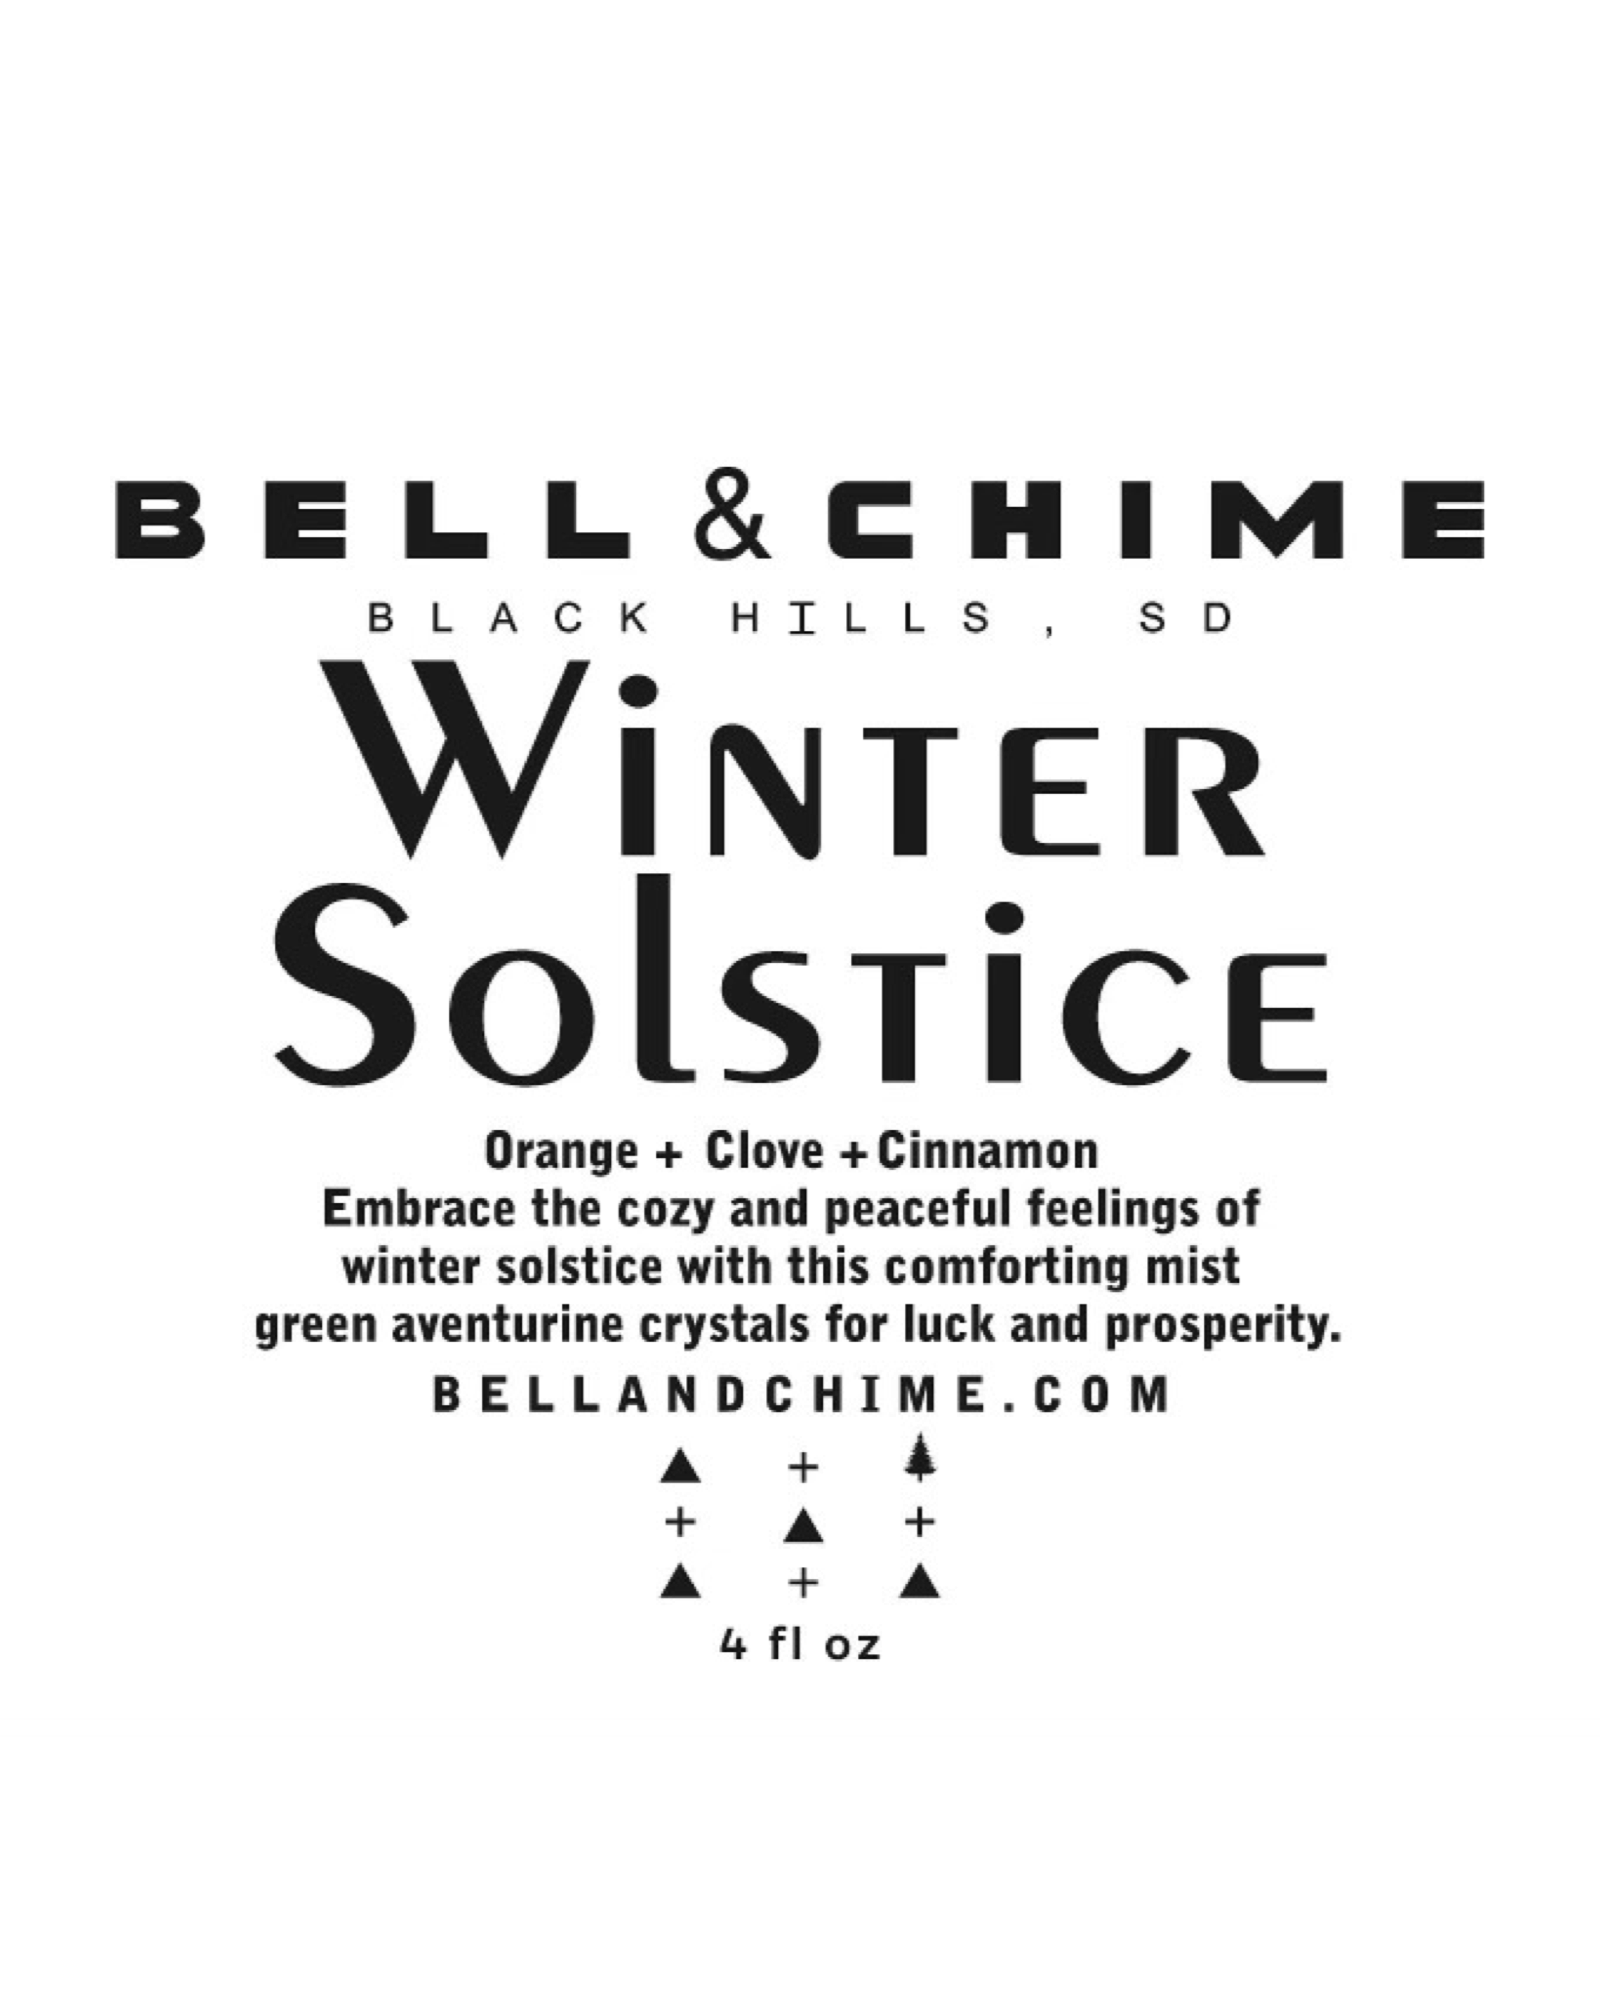 Bell & Chime: Black Hills, SD "Winter Solstice," Orange + Clove + Cinnamon, Embrace the cozy and peaceful feelings of winter solstice with this comforting mist. Green aventurine crystals for luck and prosperity. 4 fl oz.